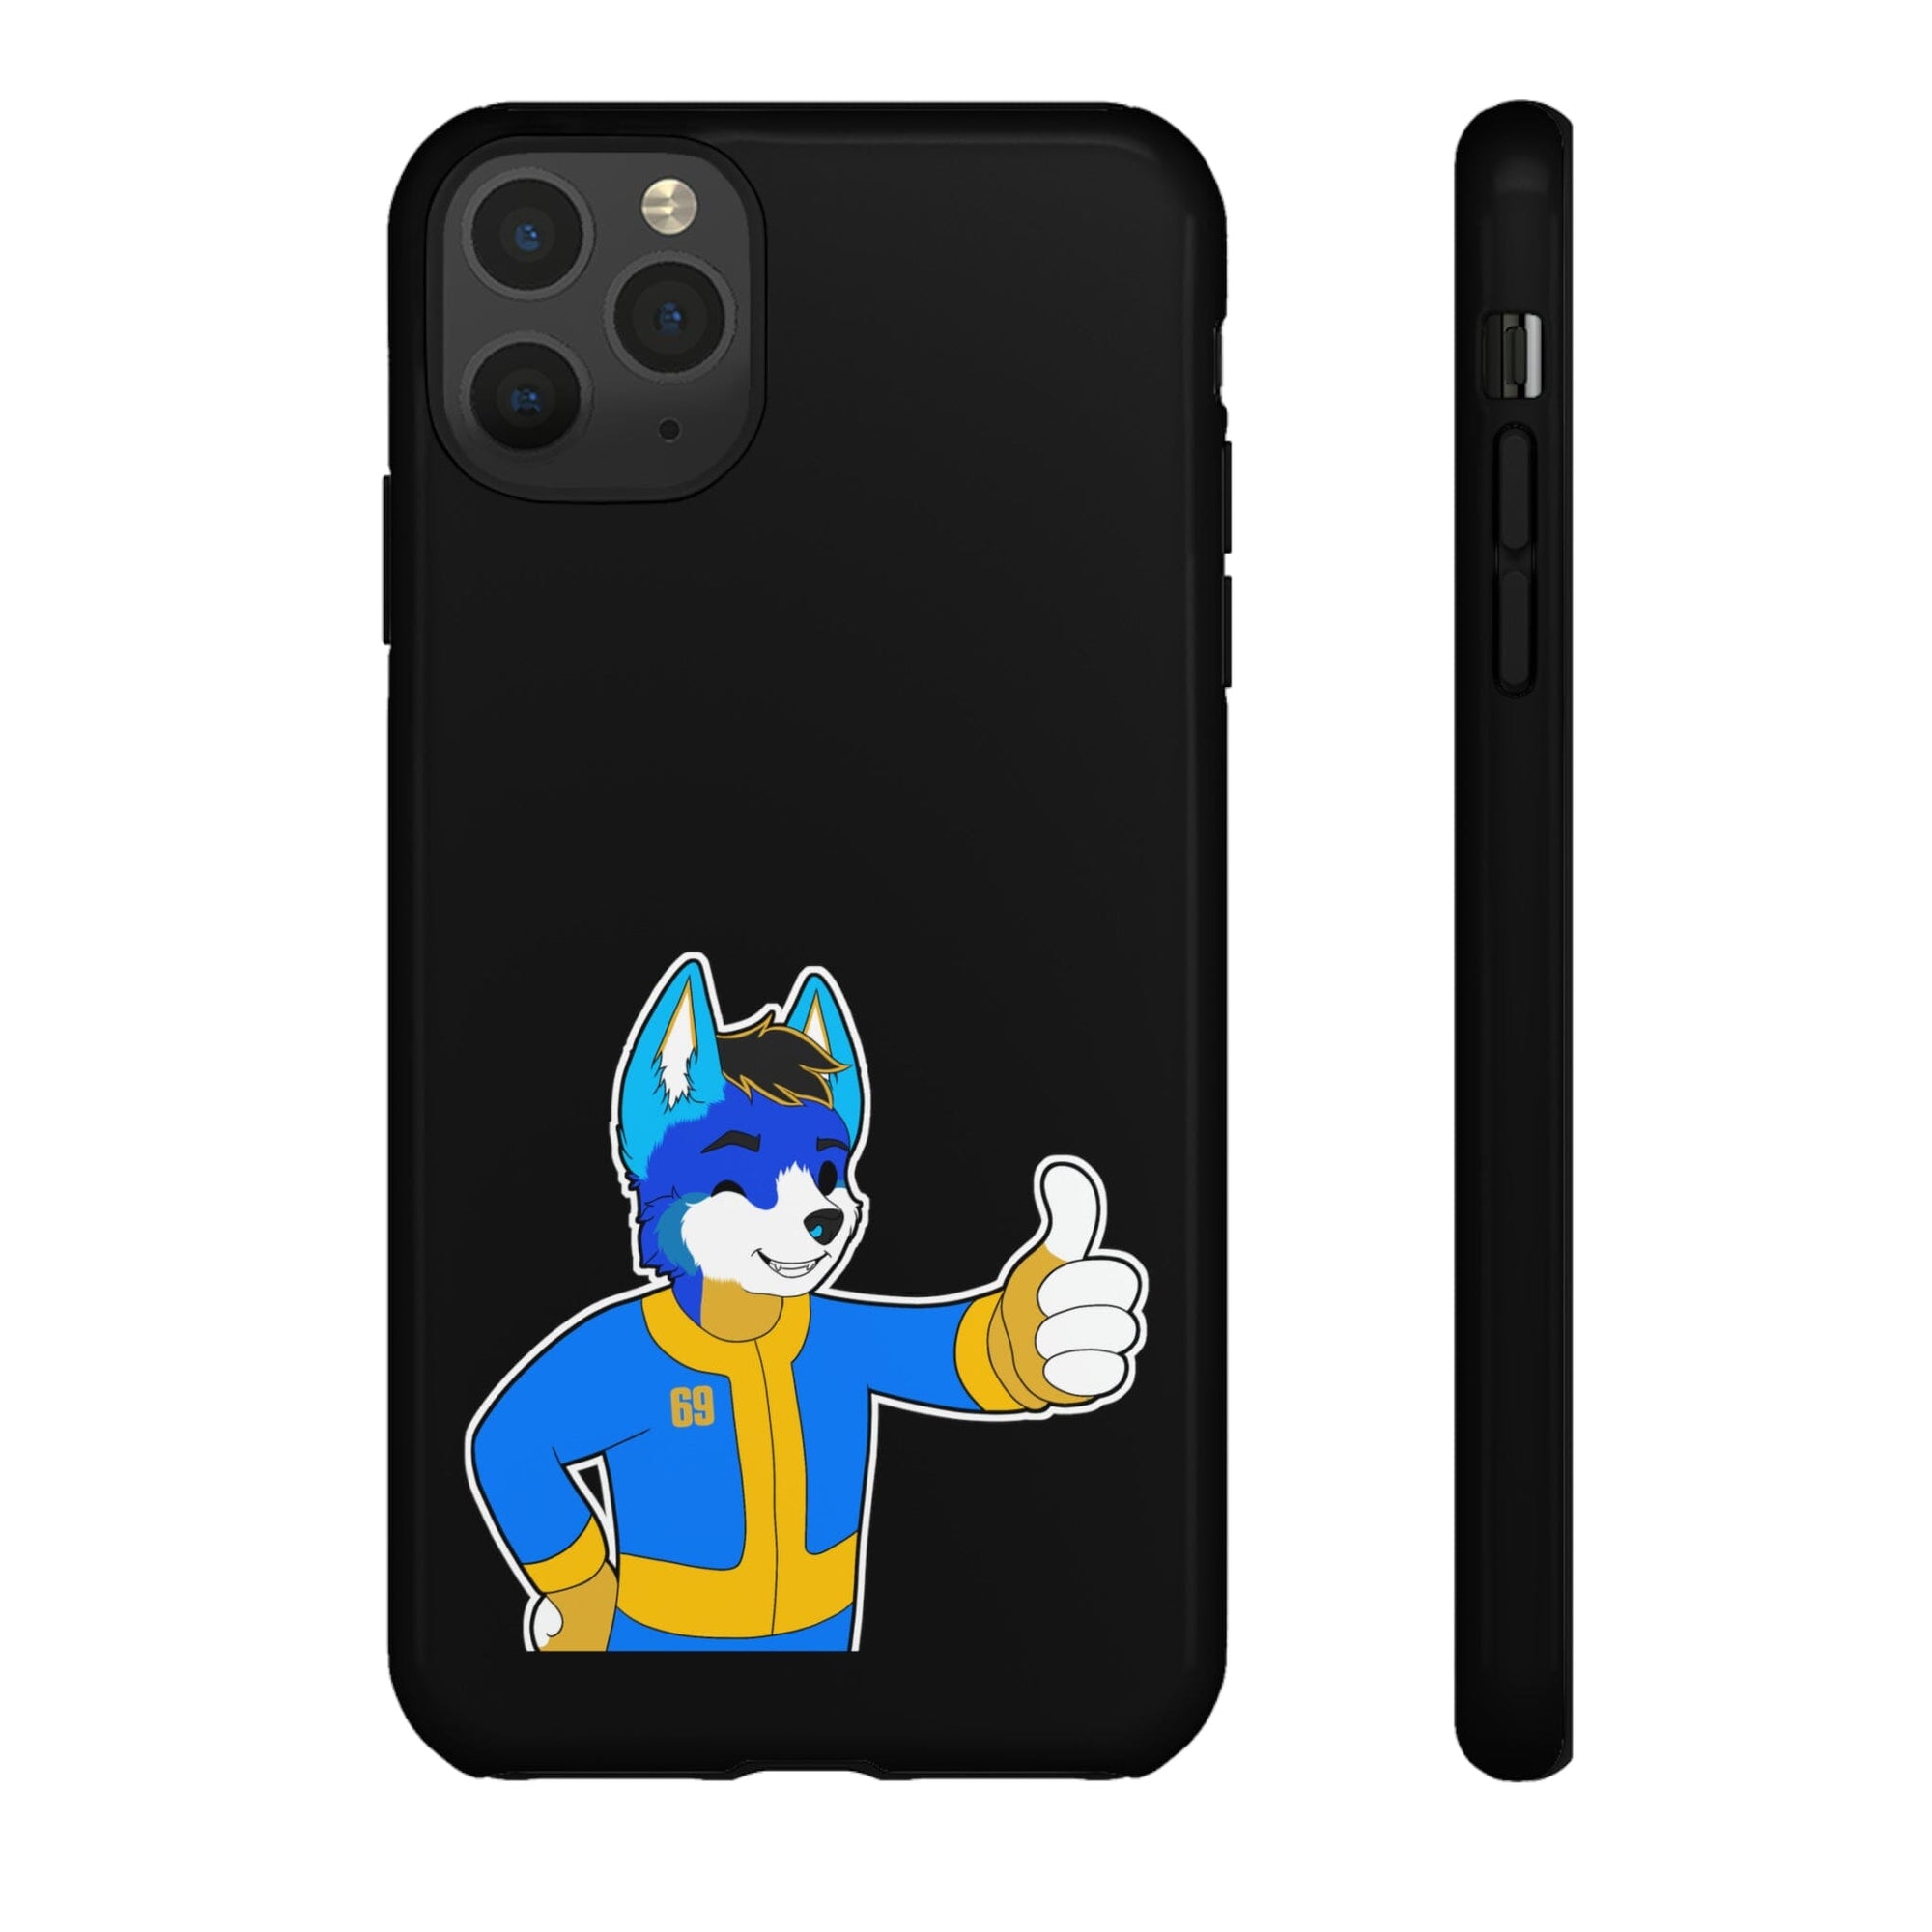 Hund The Hound - Fallout Hund - Phone Case Phone Case AFLT-Hund The Hound Glossy iPhone 11 Pro Max 